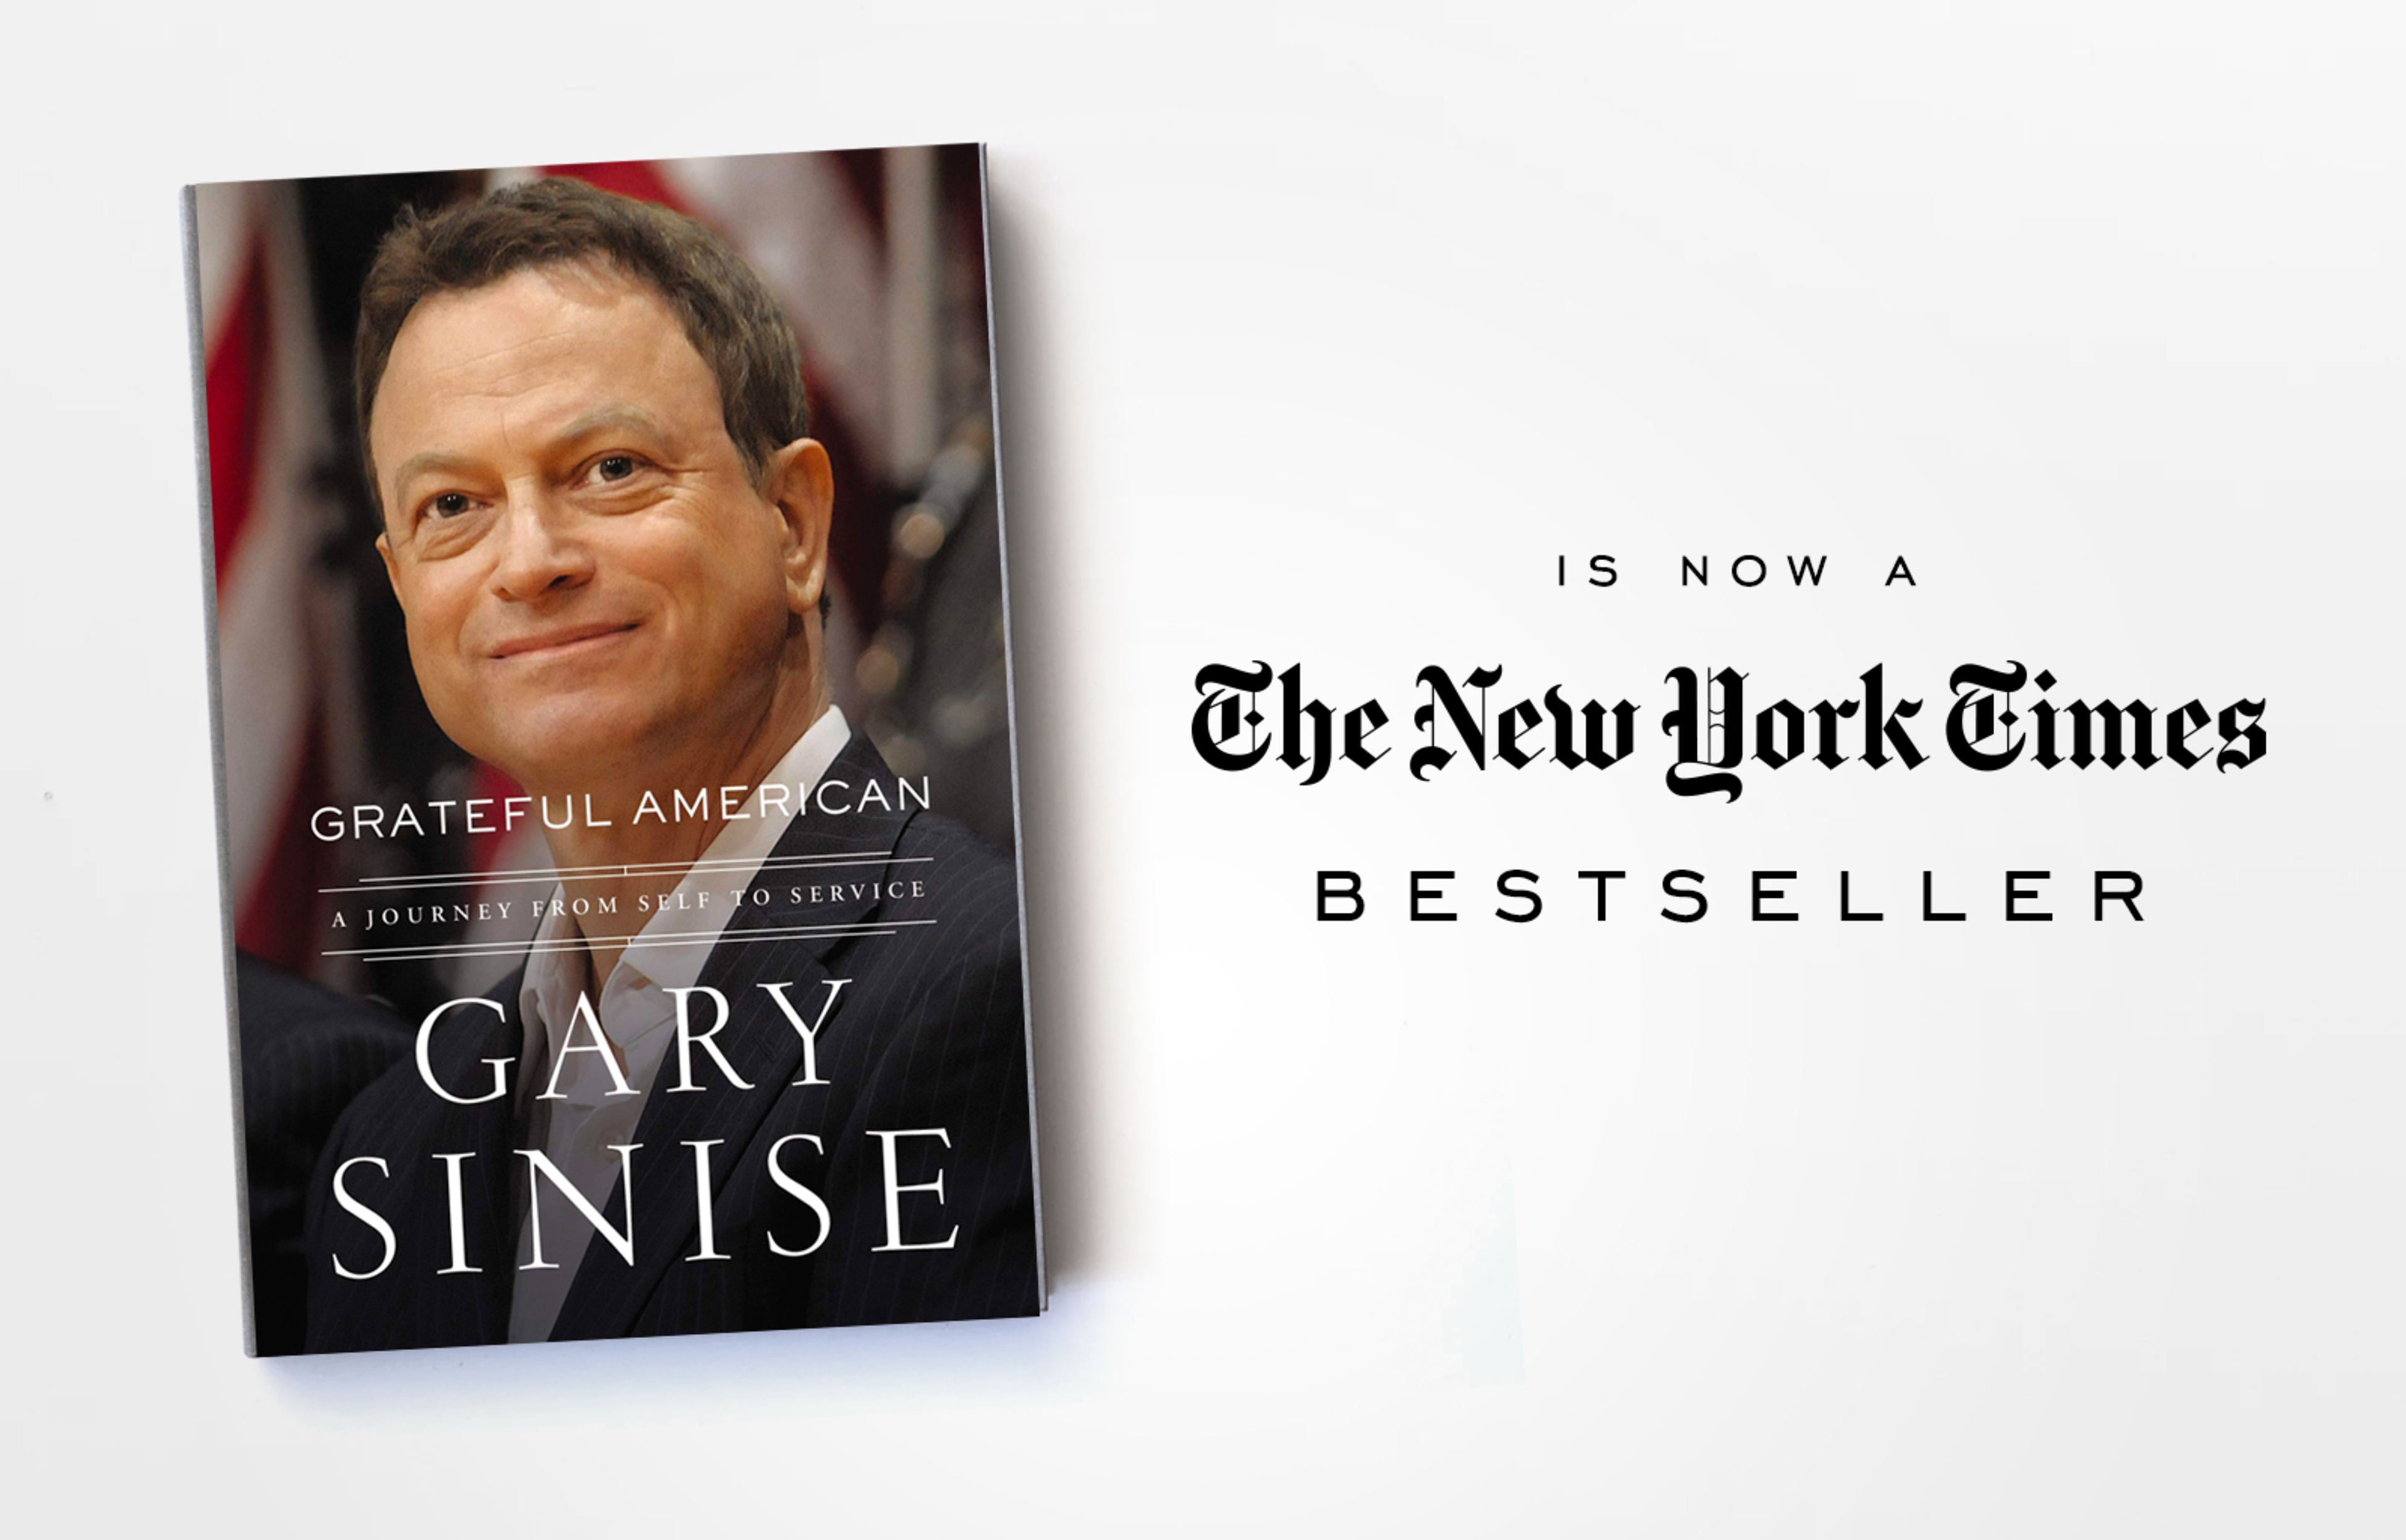 Gary Sinise - Grateful American is now a New York Times bestseller